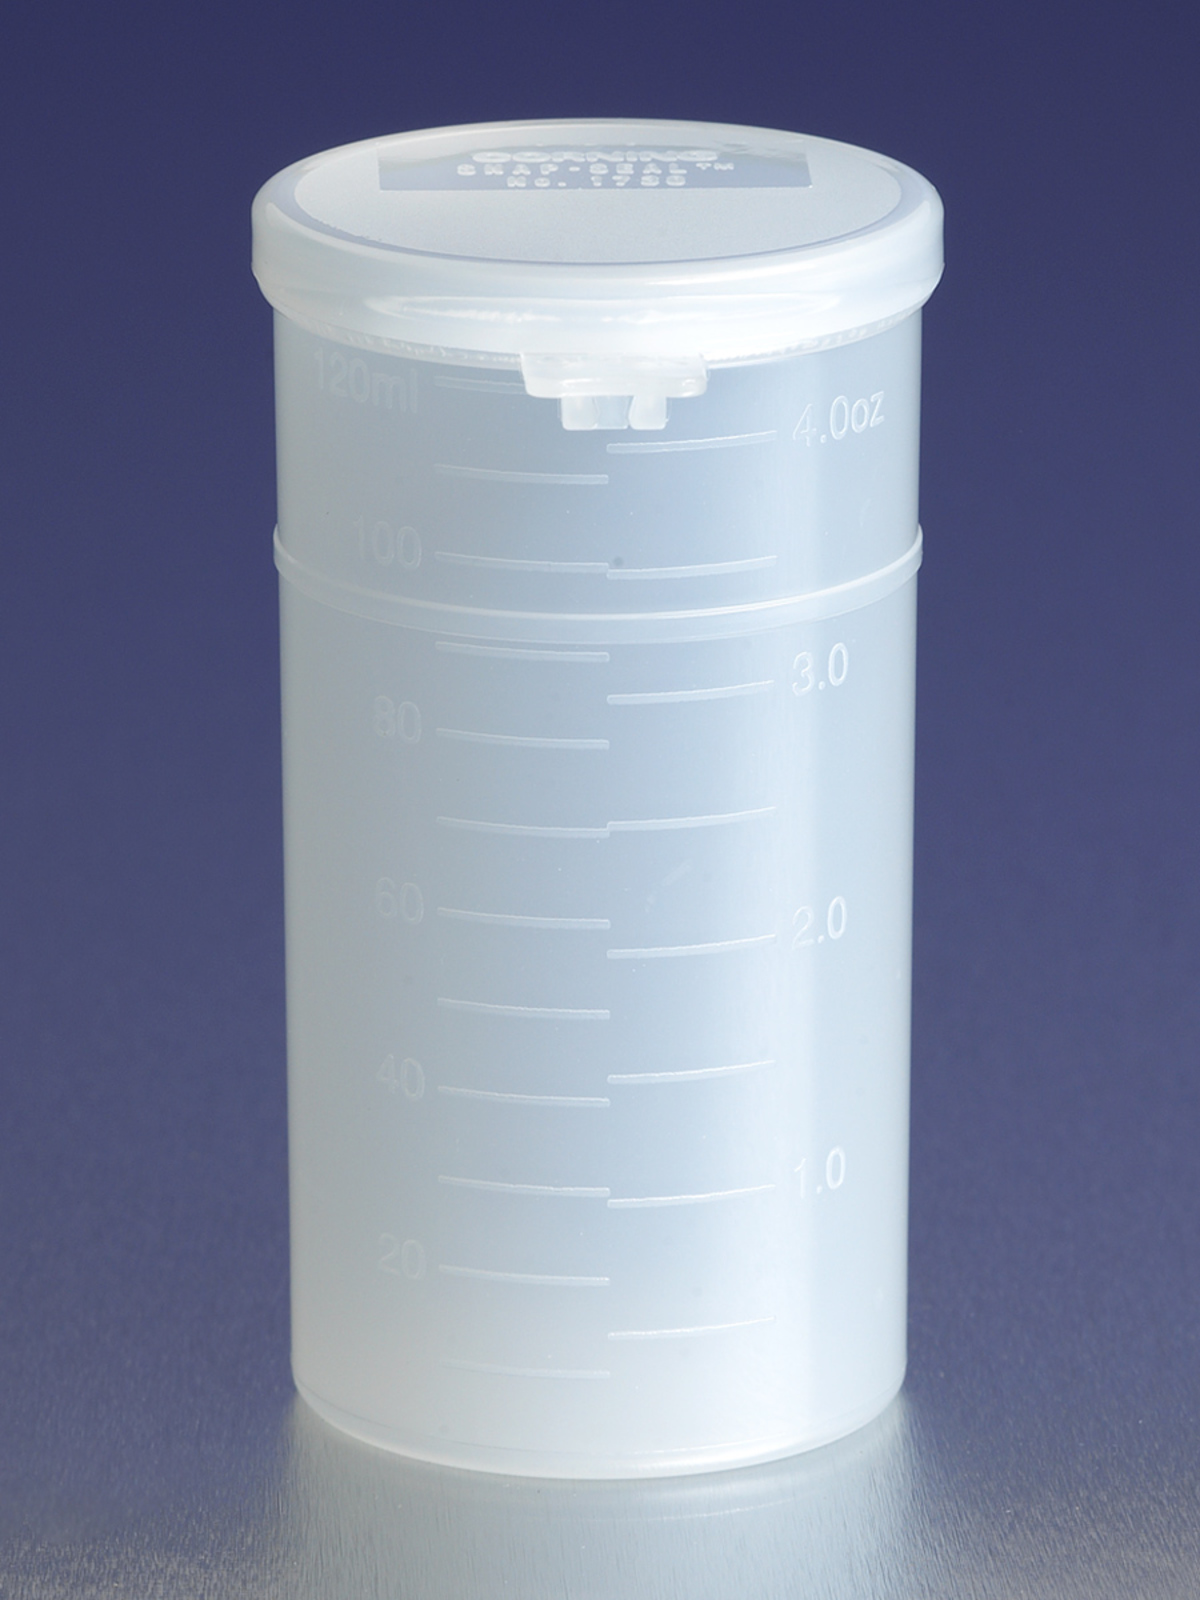 https://www.corning.com/catalog/cls/products/c/corningSnapSealDisposablePlasticSampleContainers/images/1730_A.jpg/_jcr_content/renditions/product.zoom.1200.jpg